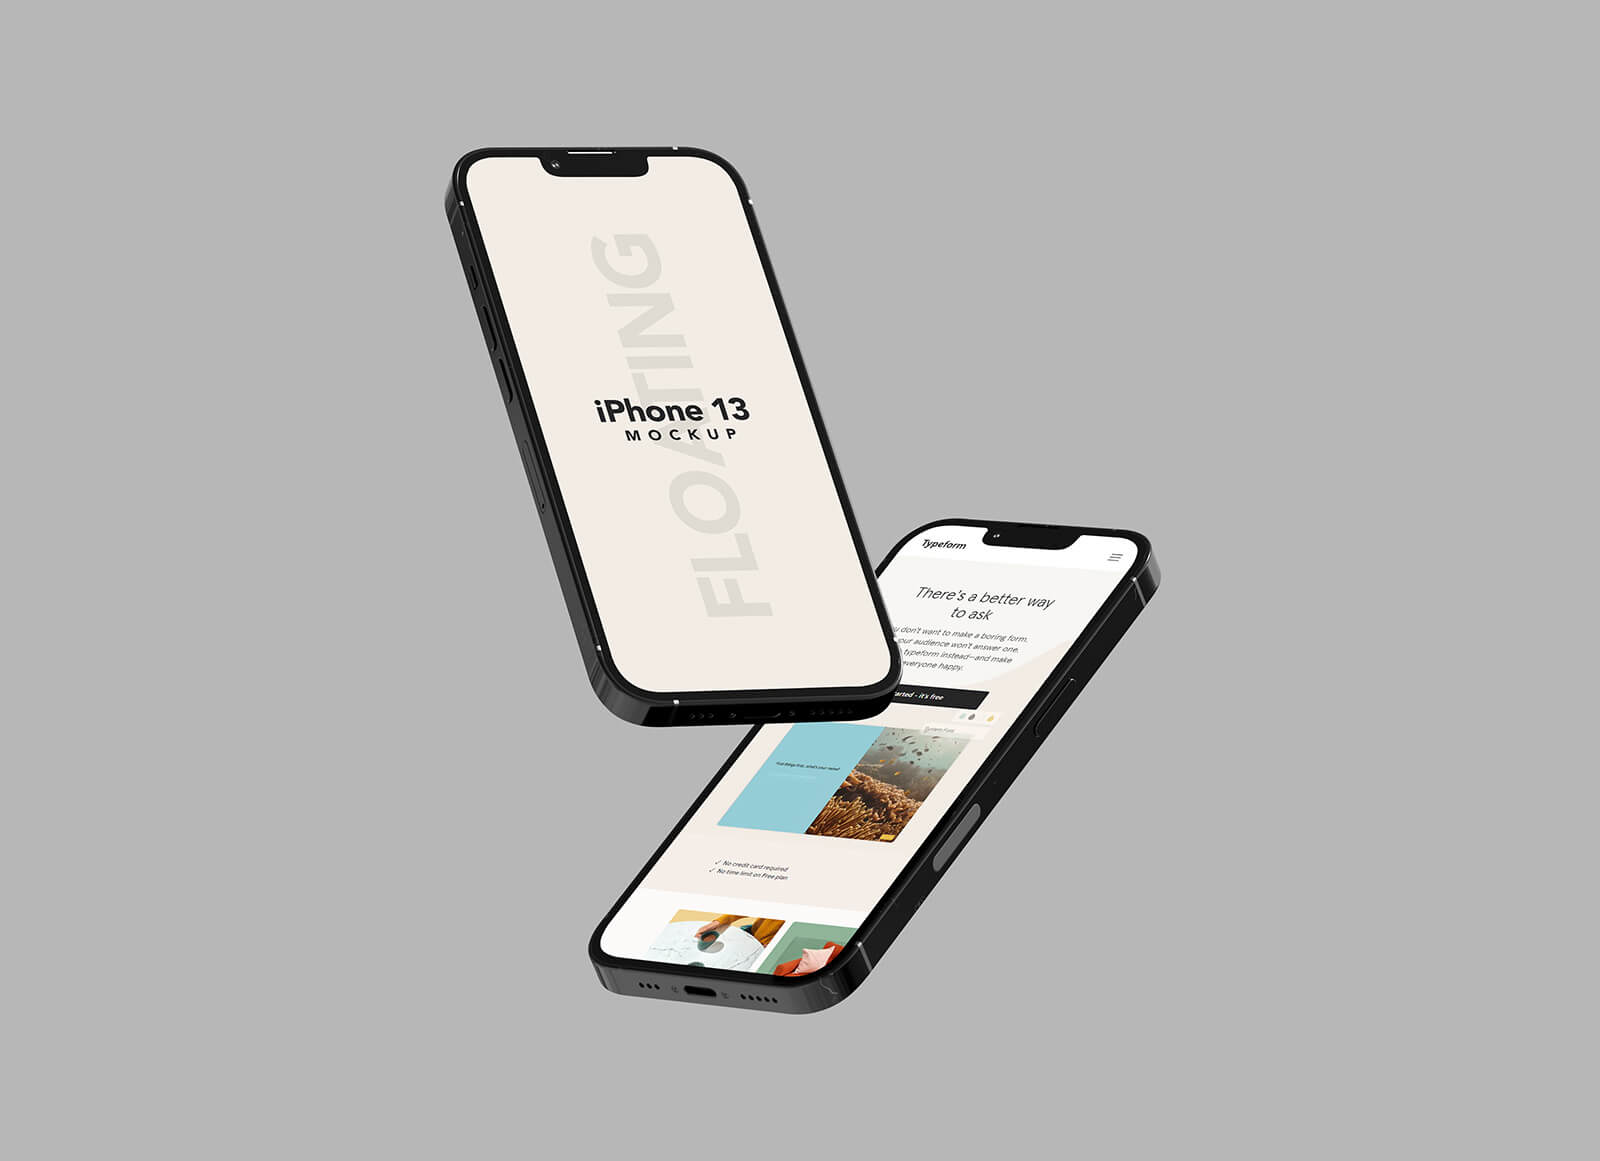 Schwimmendes iPhone 13 Mockup